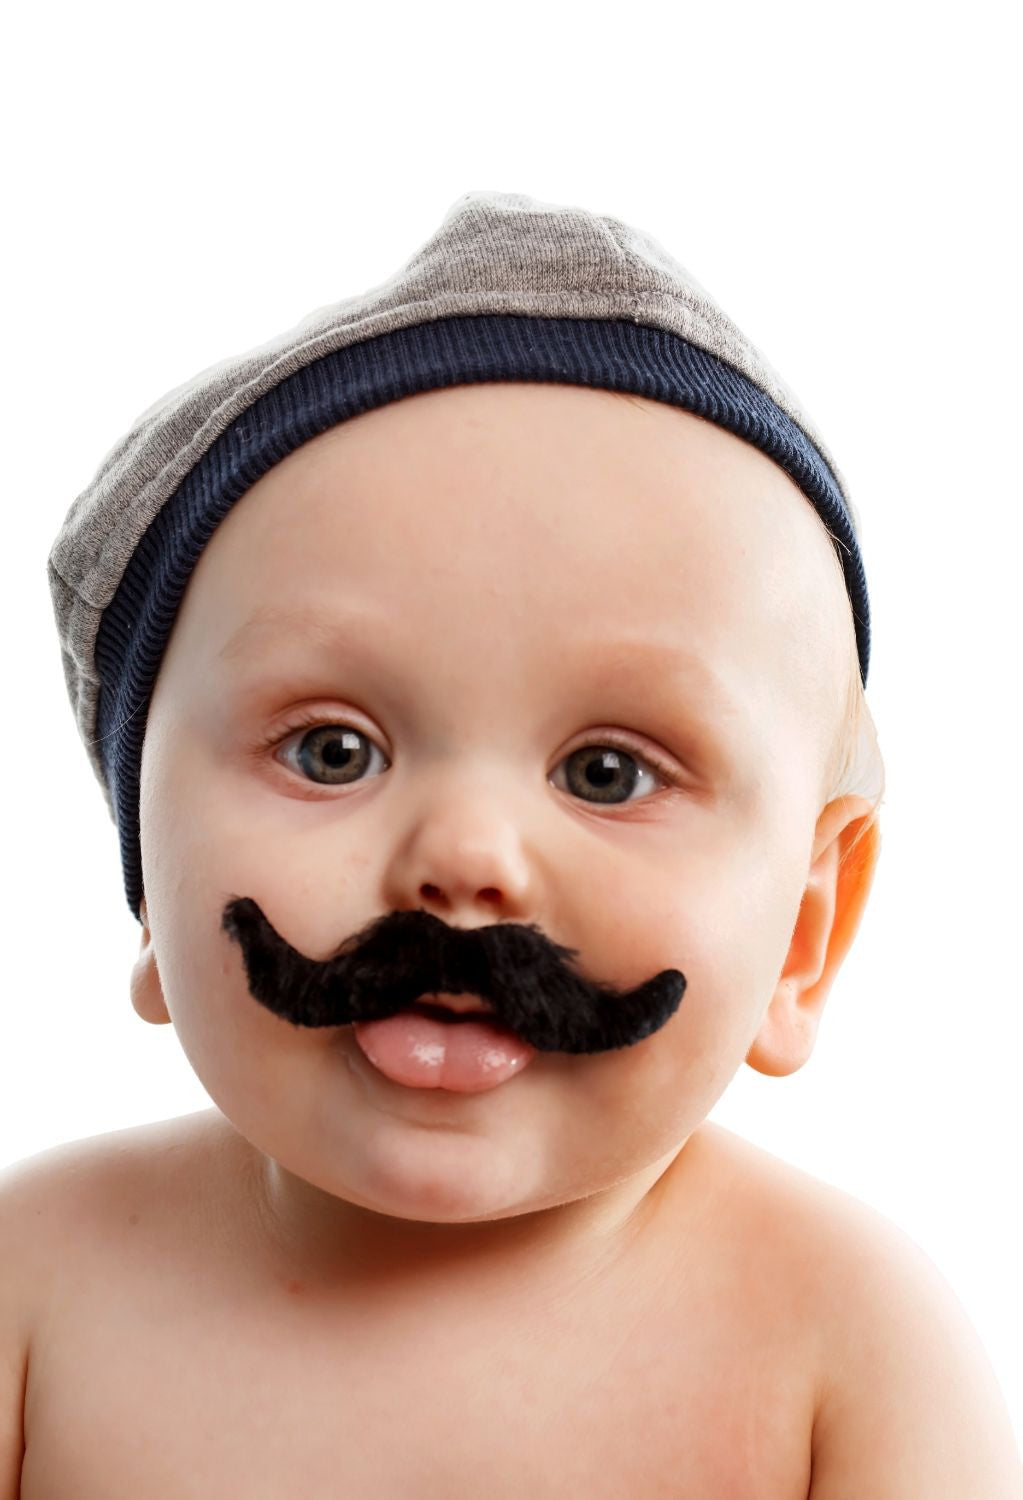 When I Grow Up I Will Have A Big Moustache - Funny Baby - Life ...